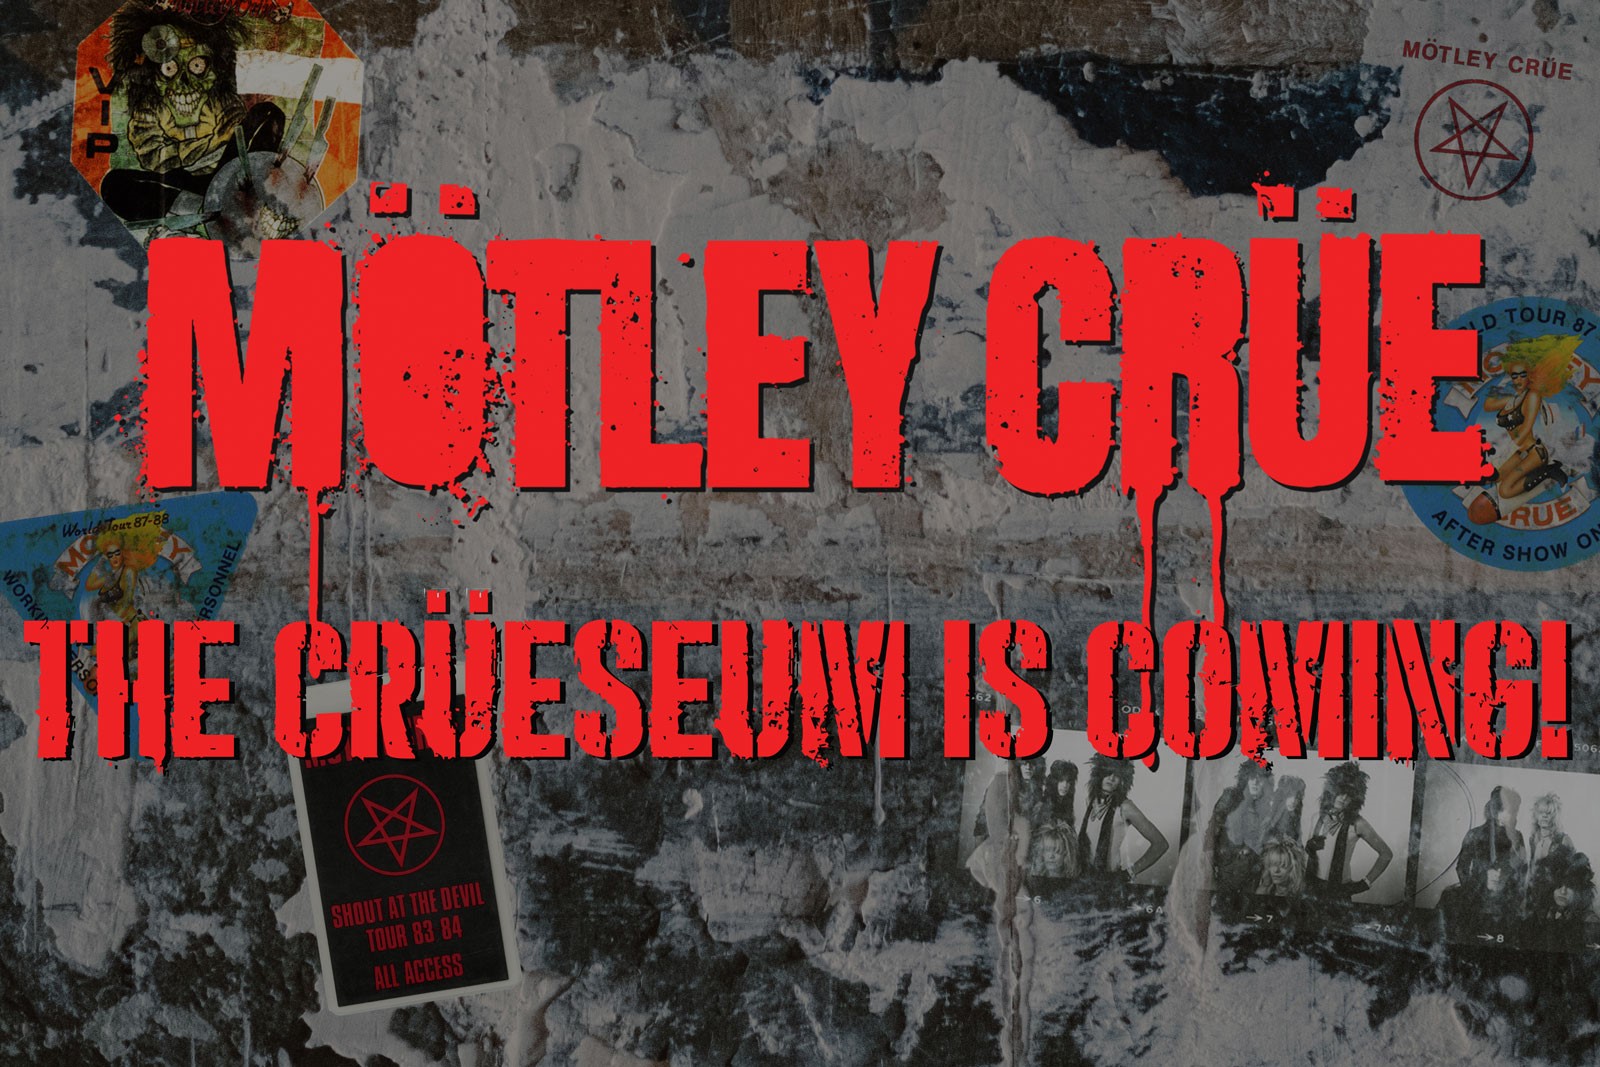 Motley Crüe Re-Launch The Infamous S.I.N. Club and Announce the "Crüeseum"